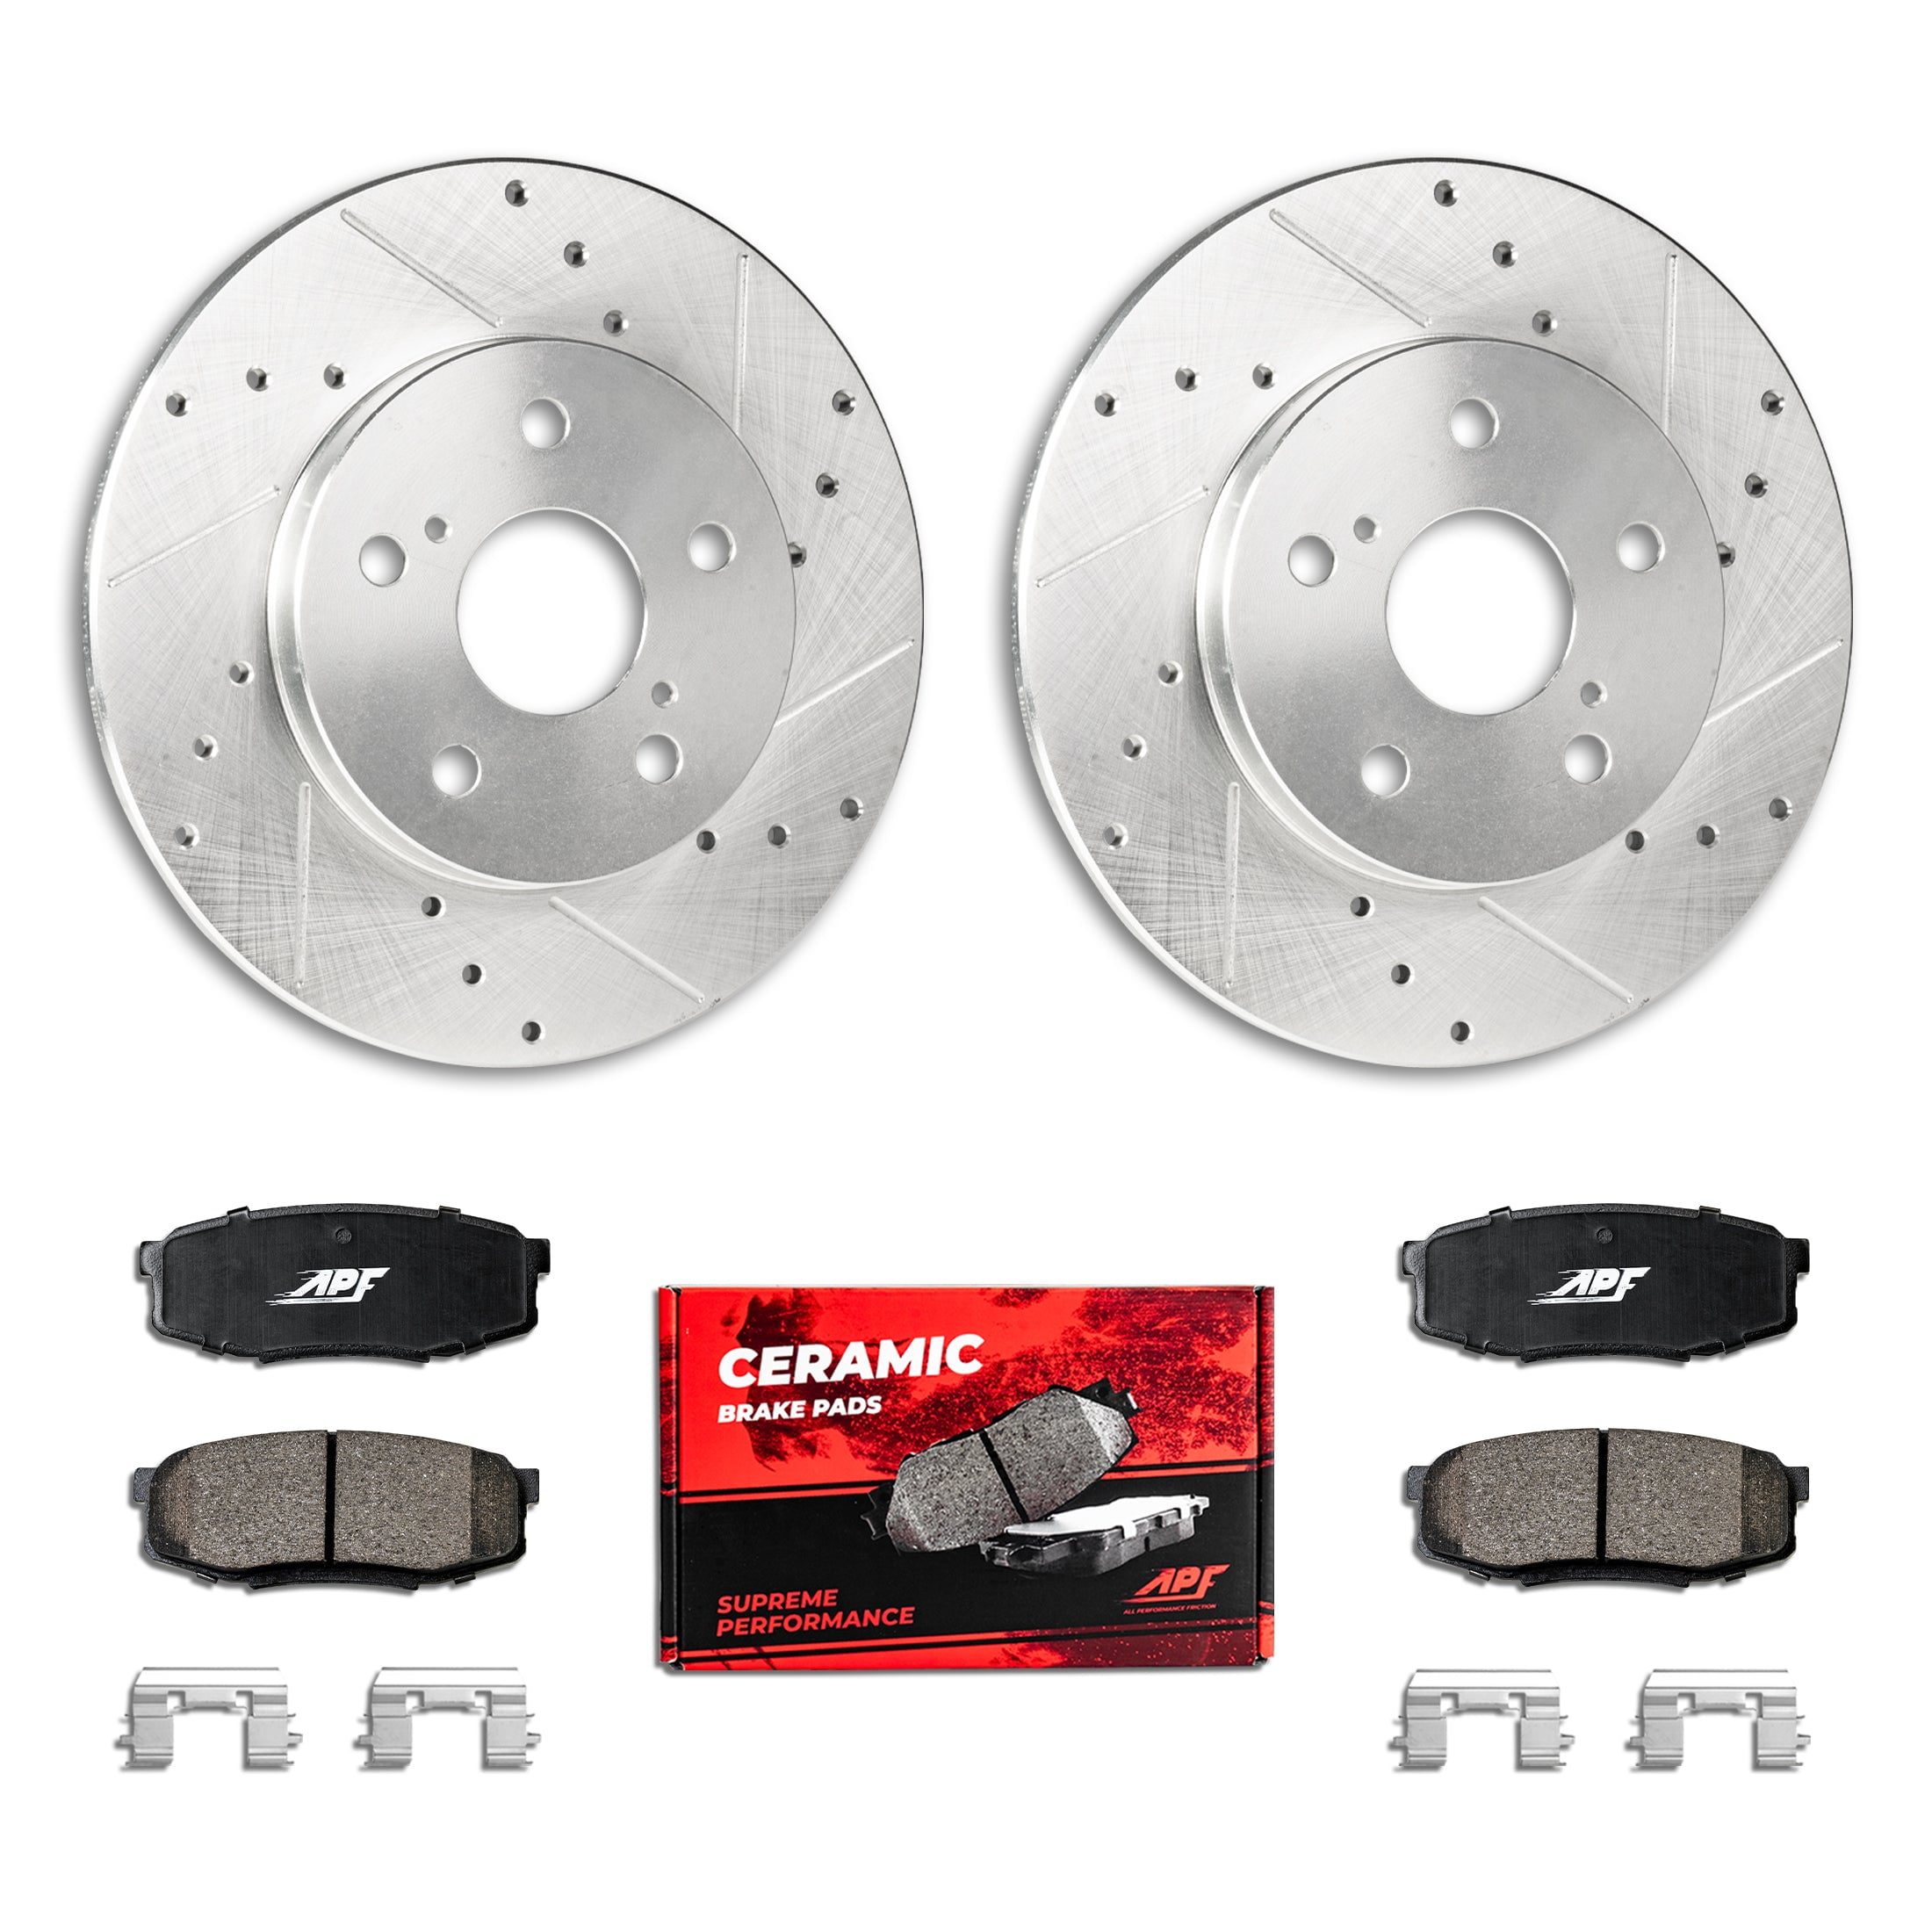 Rear Cross Drilled Brake Rotors for 2010-2011 Honda Accord Crosstour FWD Front